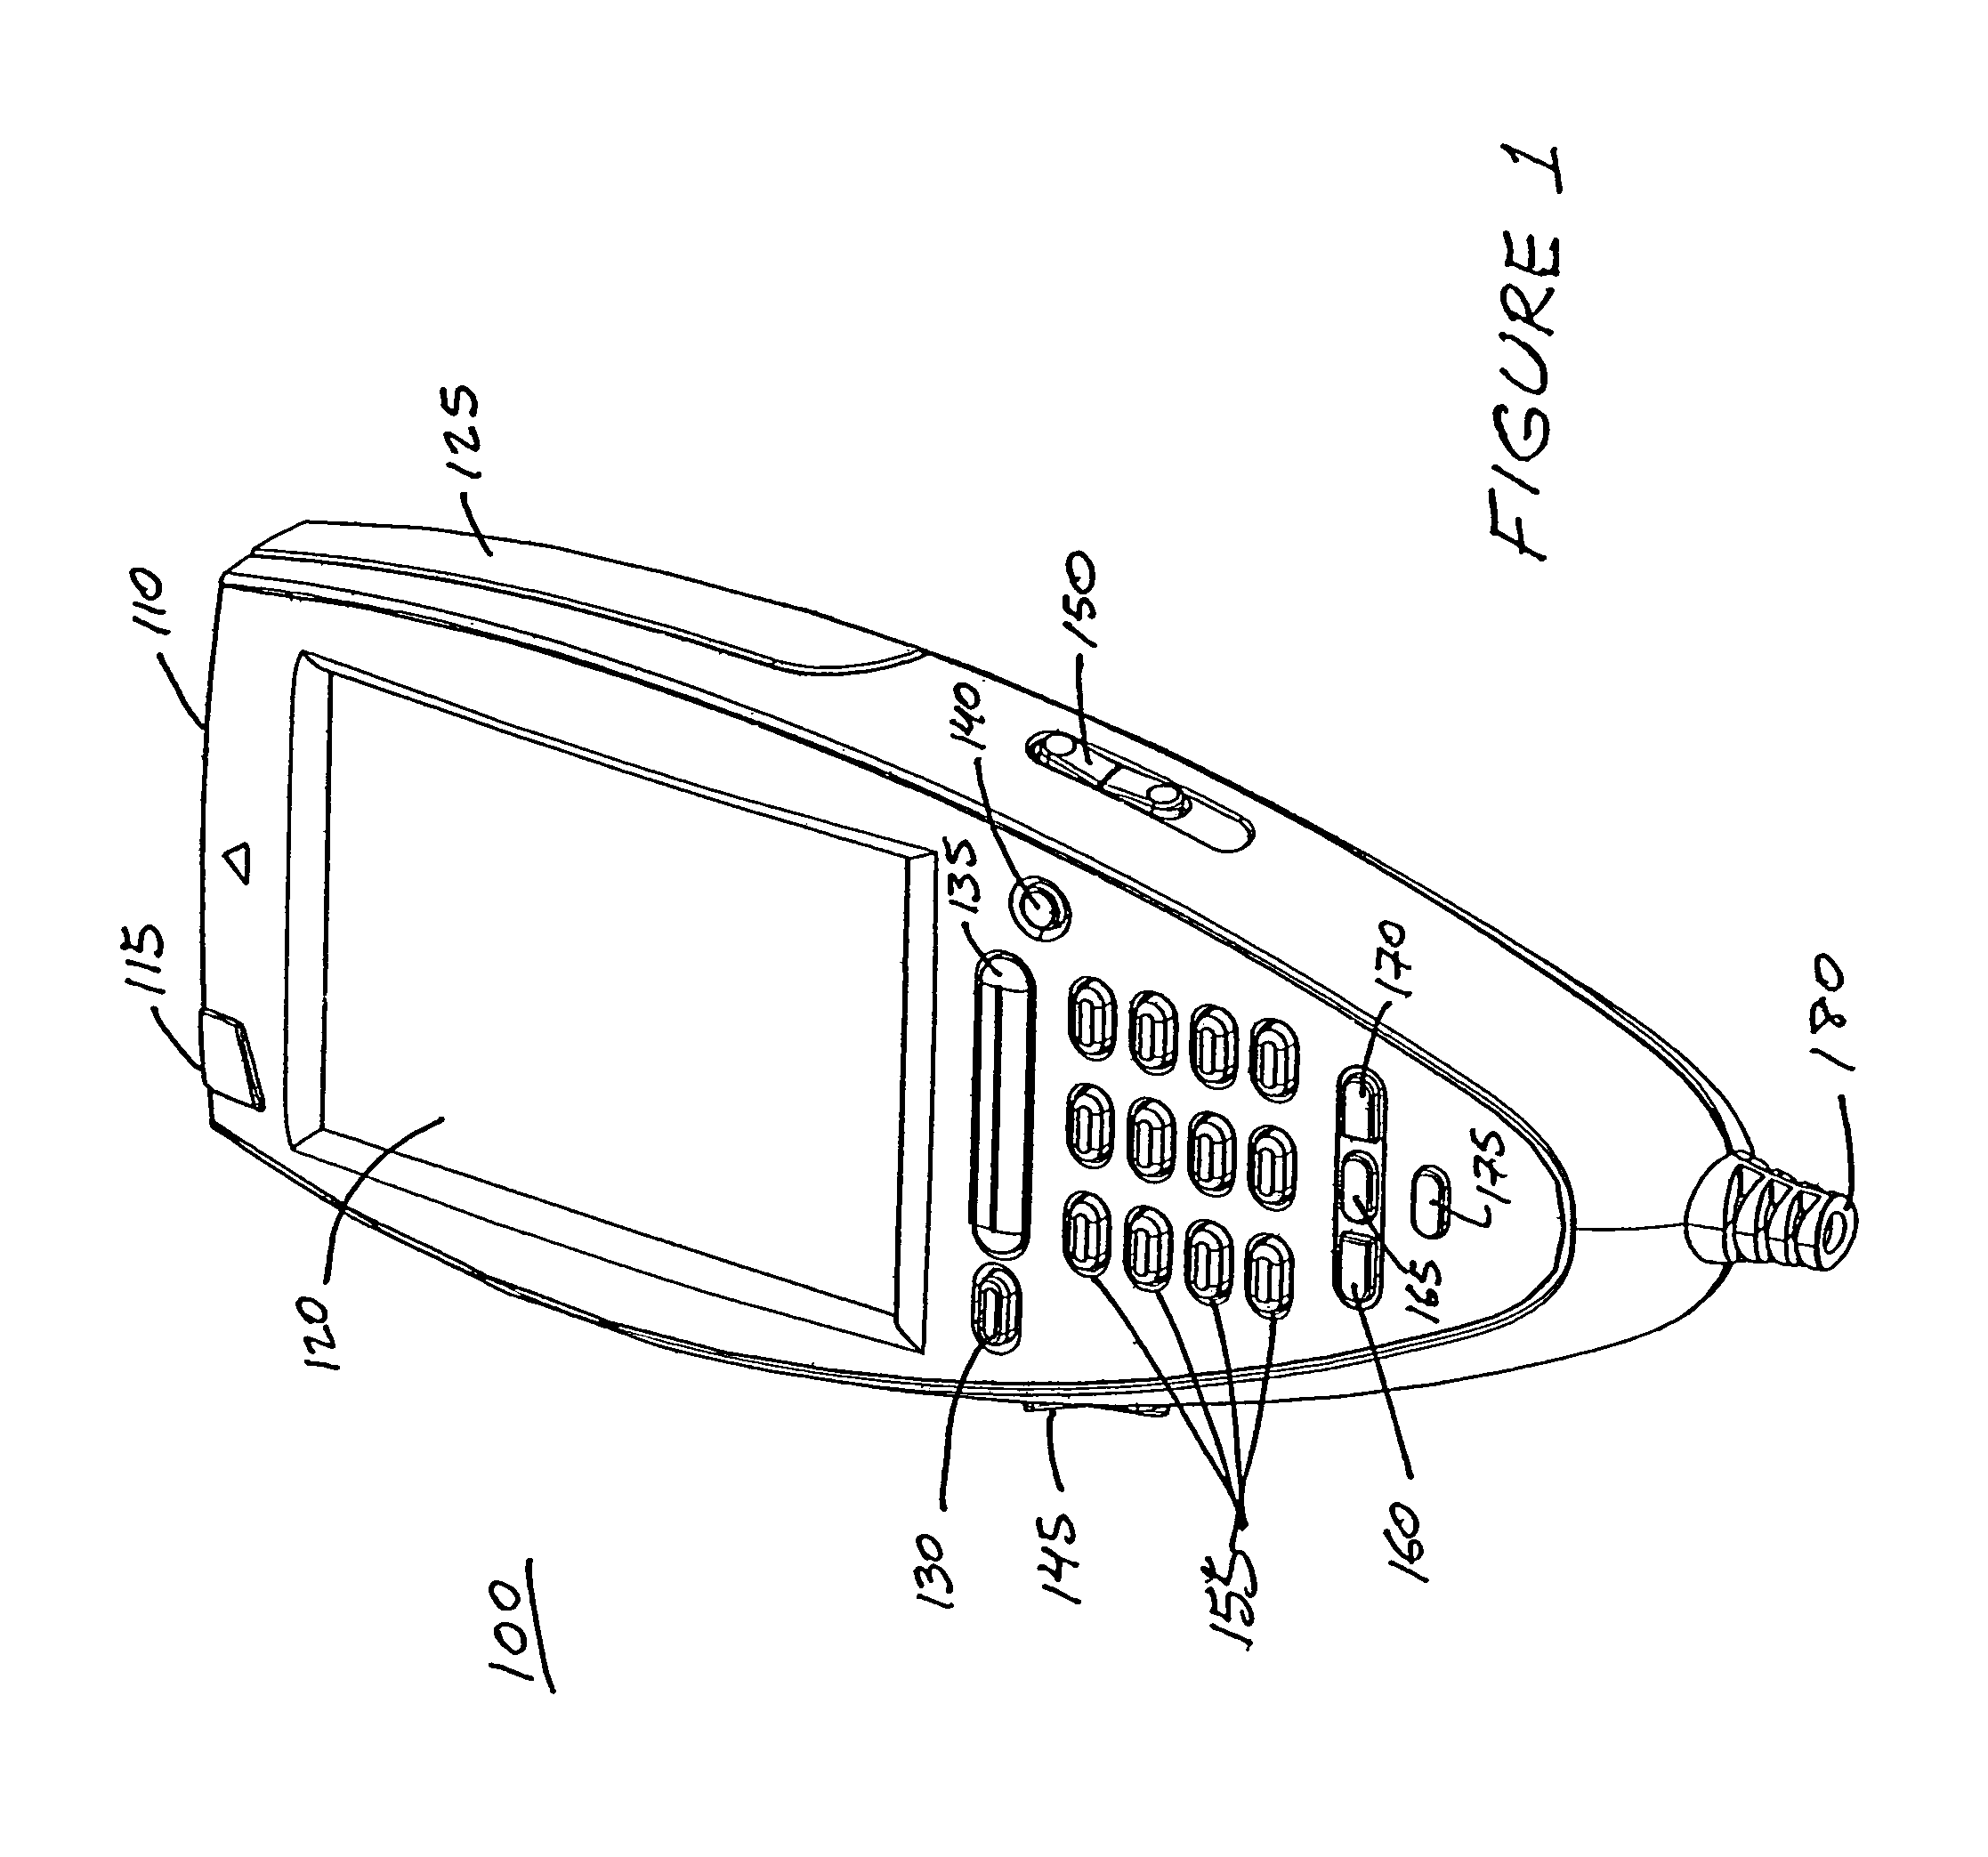 Methods and systems for operating a display facility or other public space